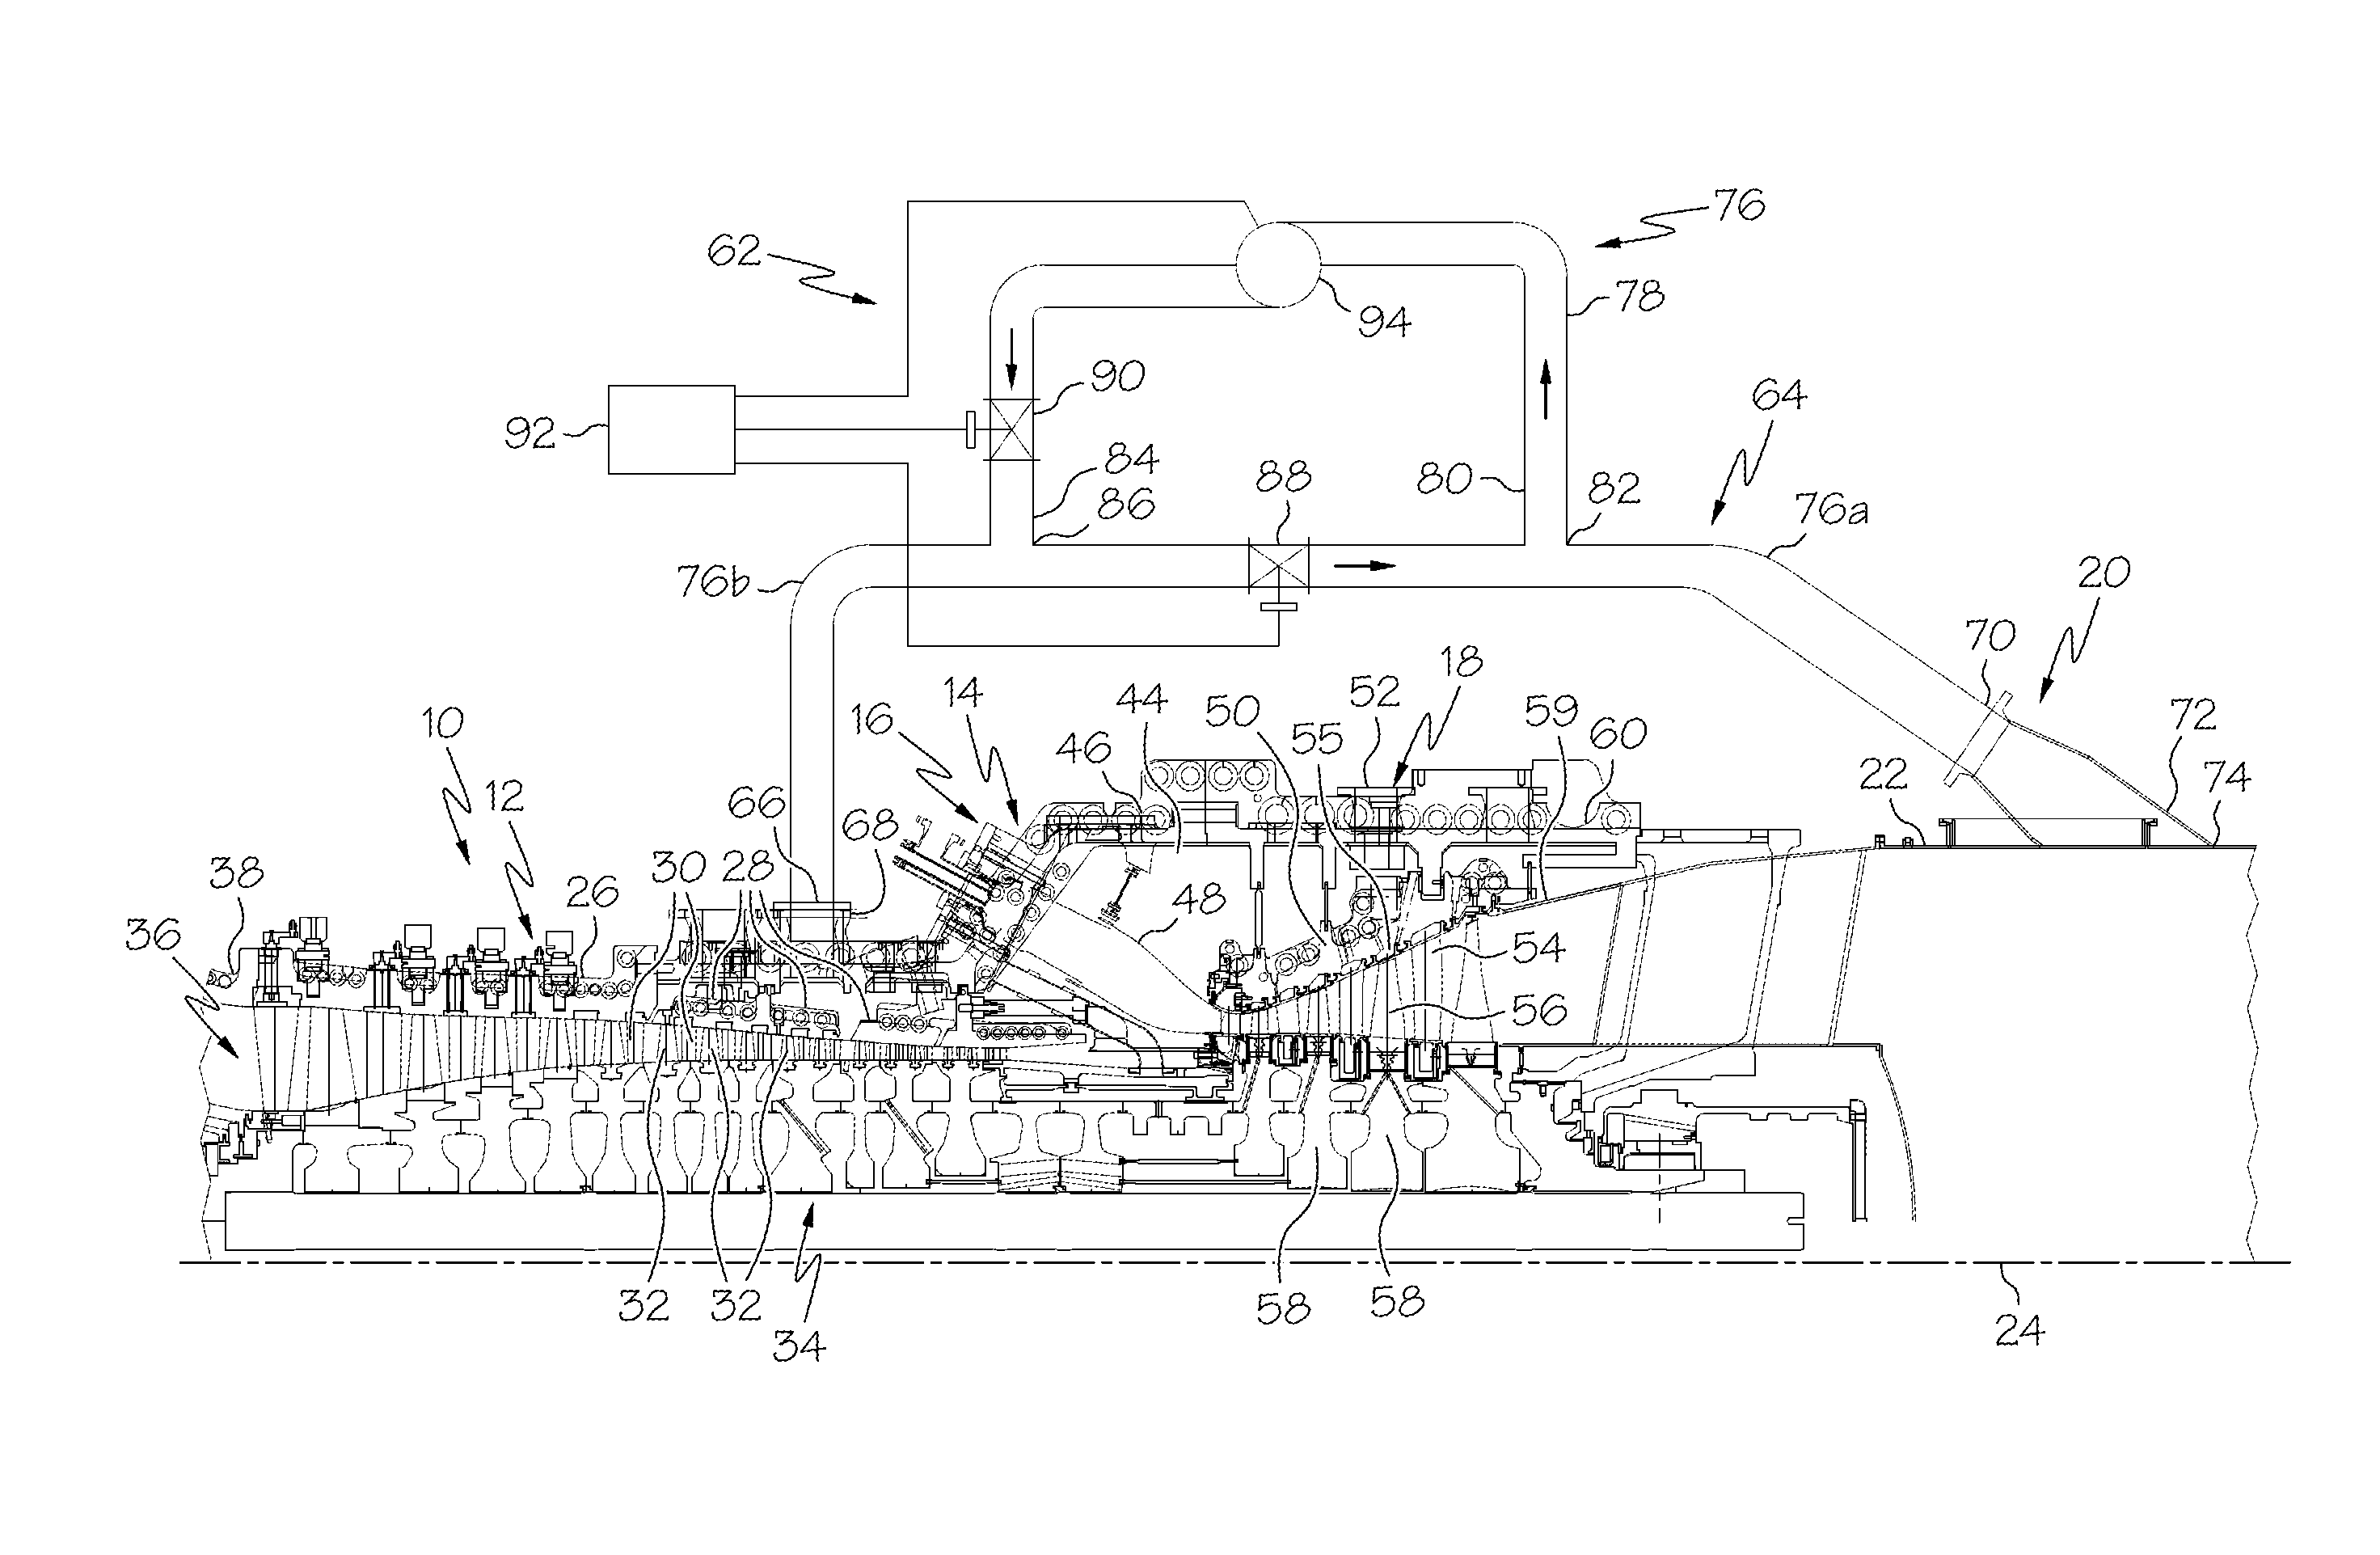 Heat retention and distribution system for gas turbine engines